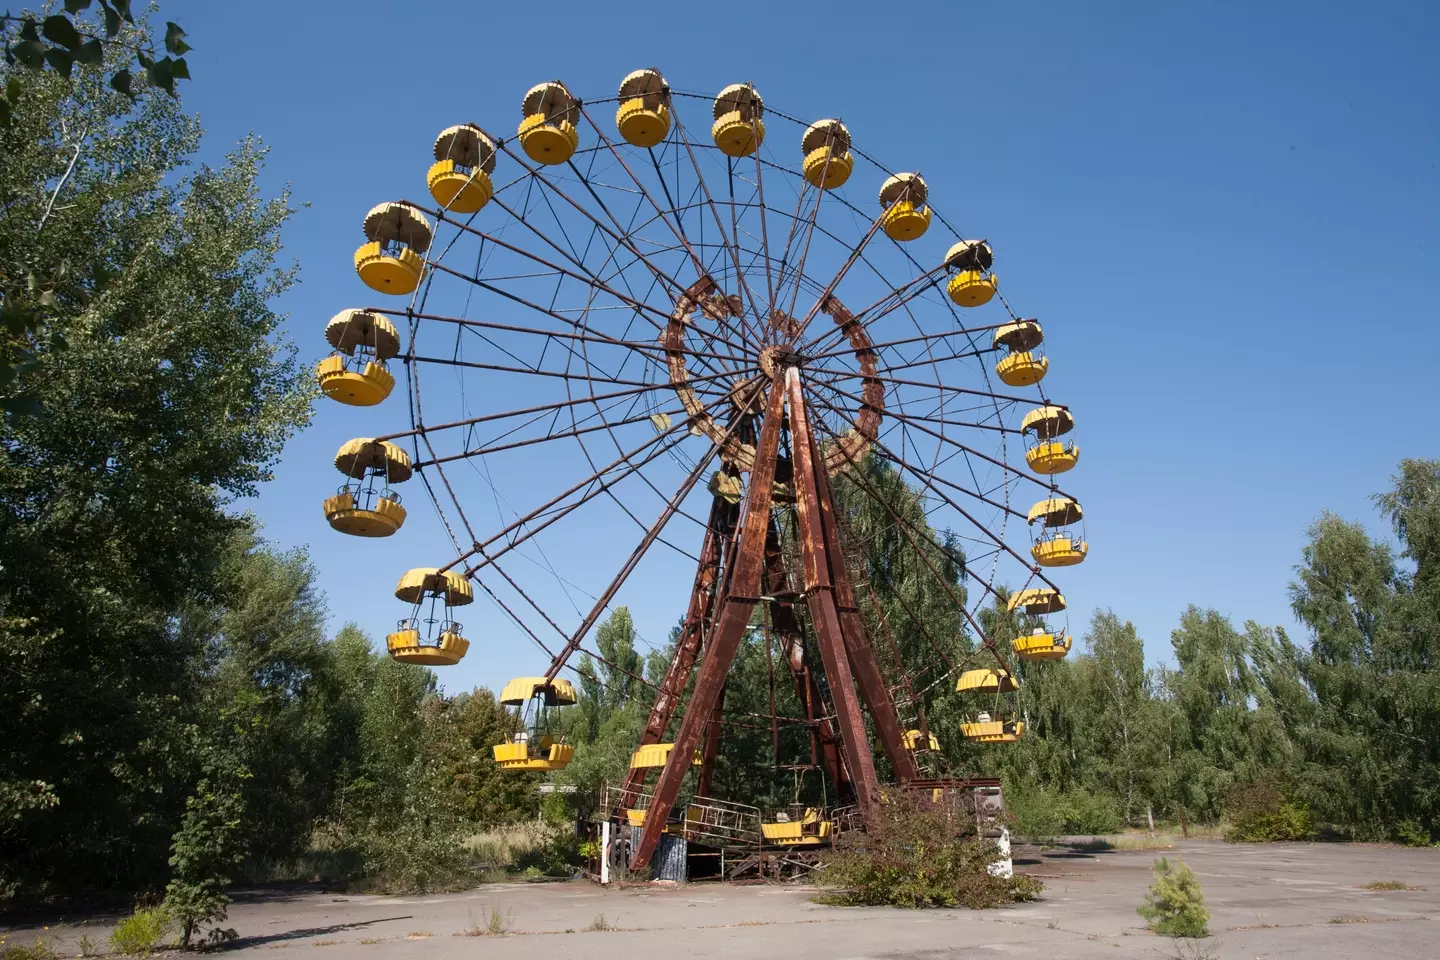 An abandoned ferris wheel in the Chernobyl exclusion zone.